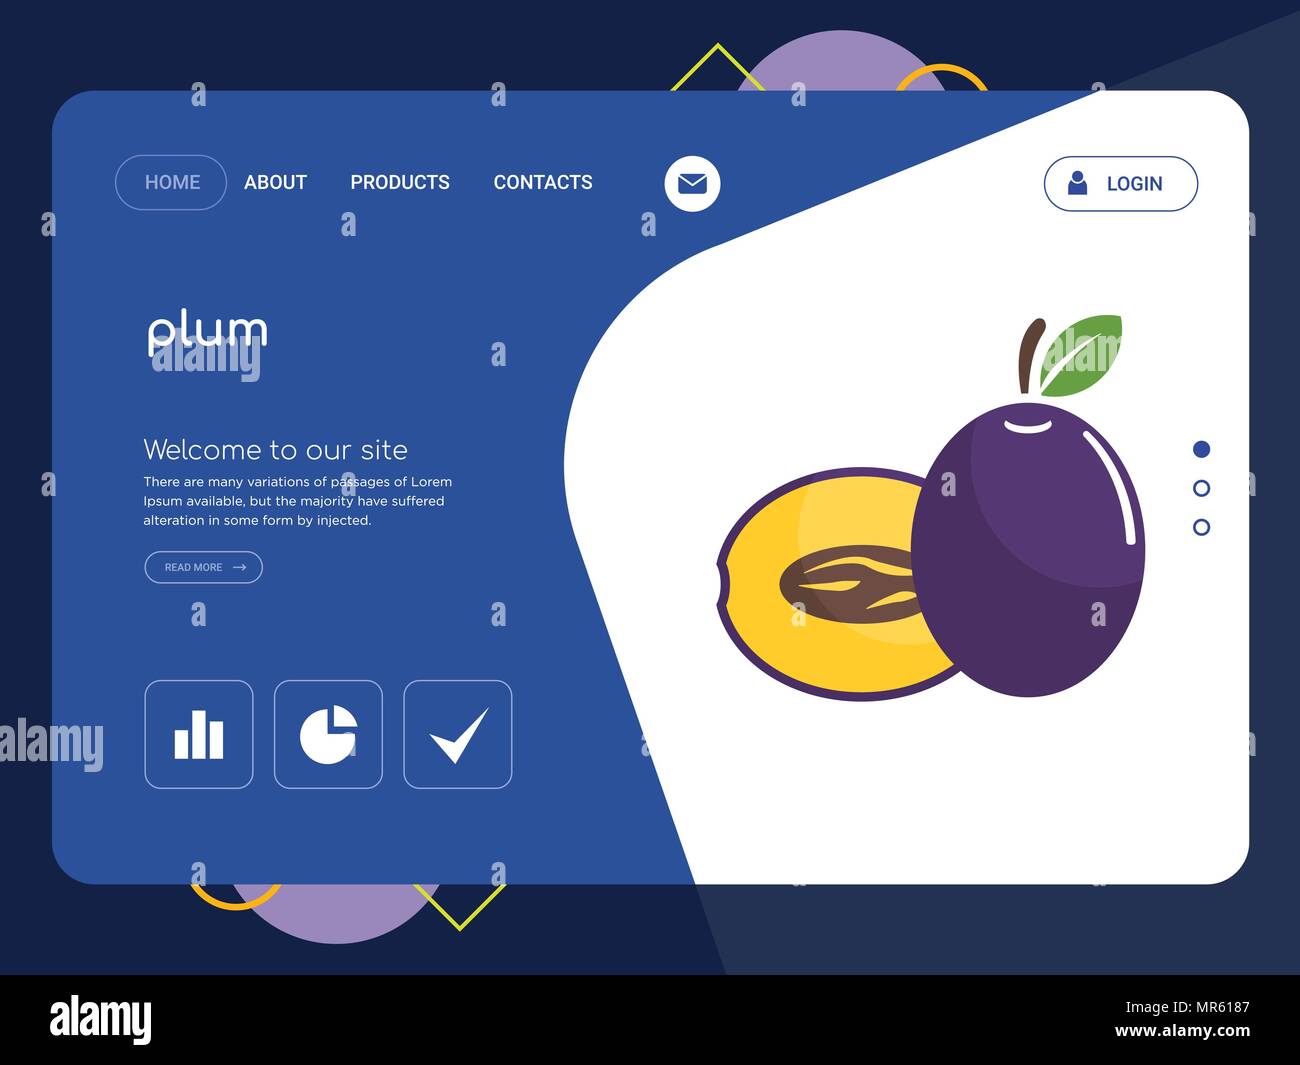 Quality One Page plum Website Template Vector Eps, Modern Web Design with flat UI elements and landscape illustration, ideal for landing page Stock Vector